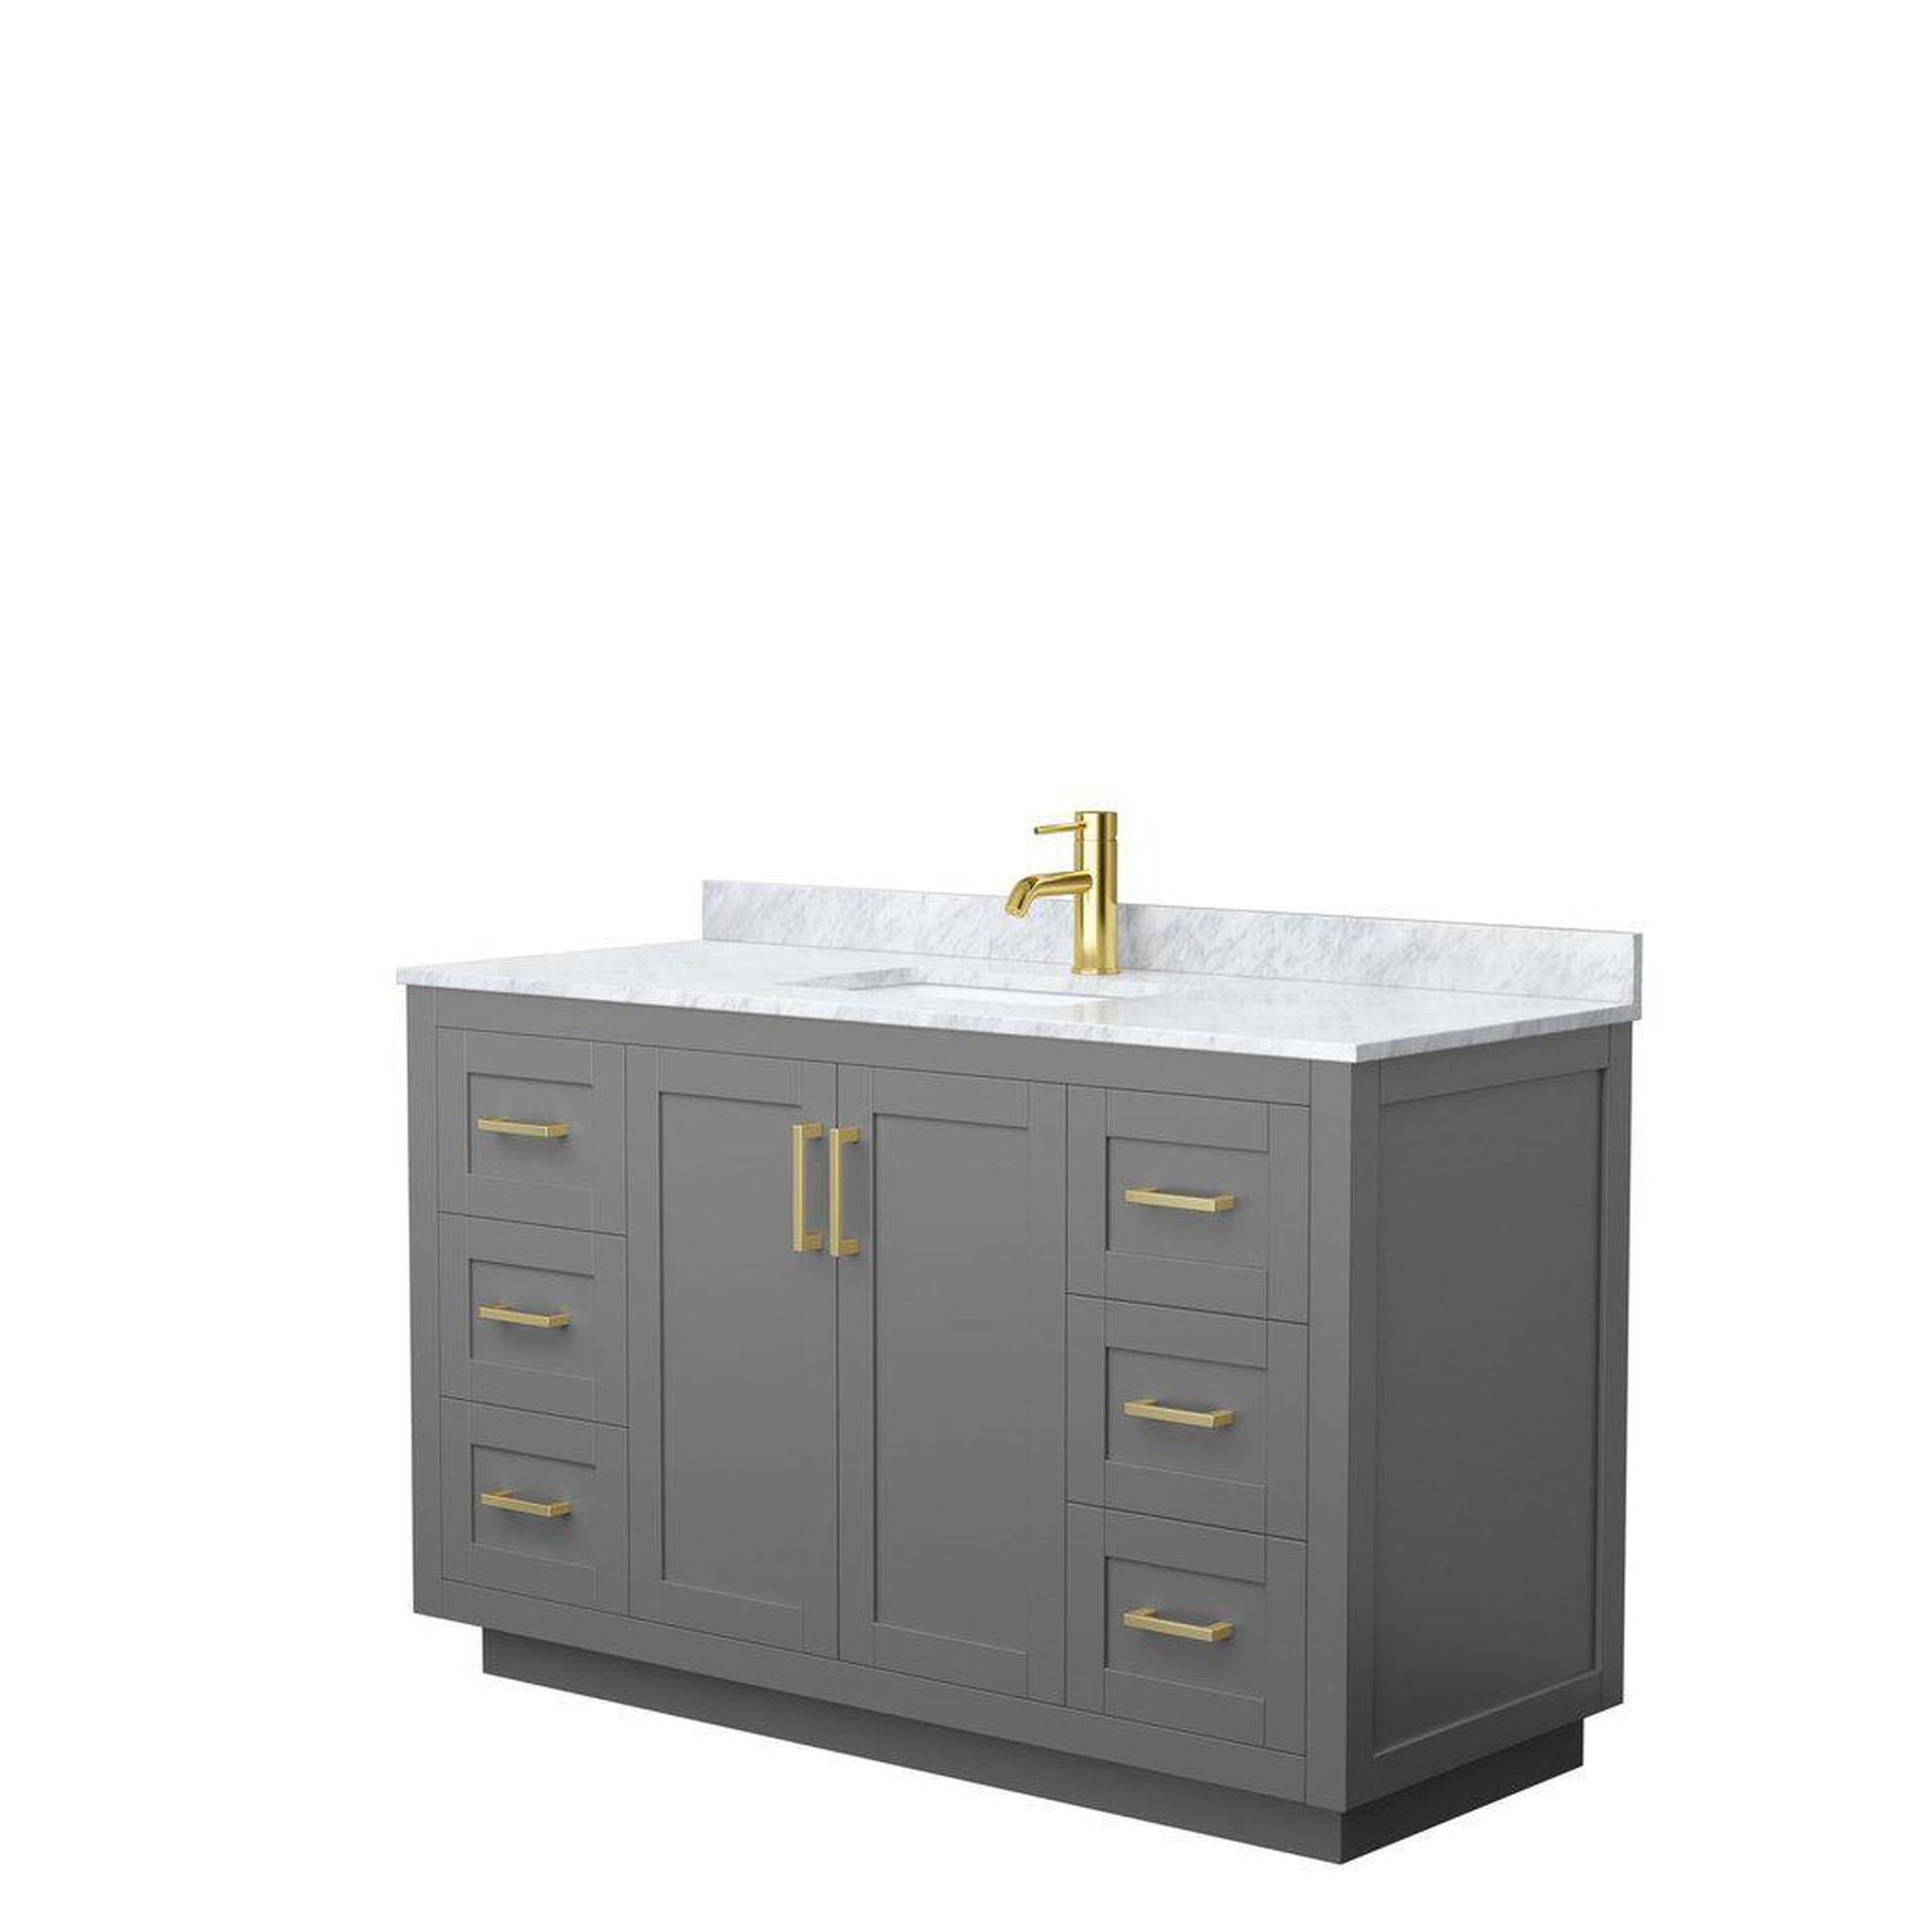 Wyndham Collection Miranda 54" Single Bathroom Dark Gray Vanity Set With White Carrara Marble Countertop, Undermount Square Sink, And Brushed Gold Trim